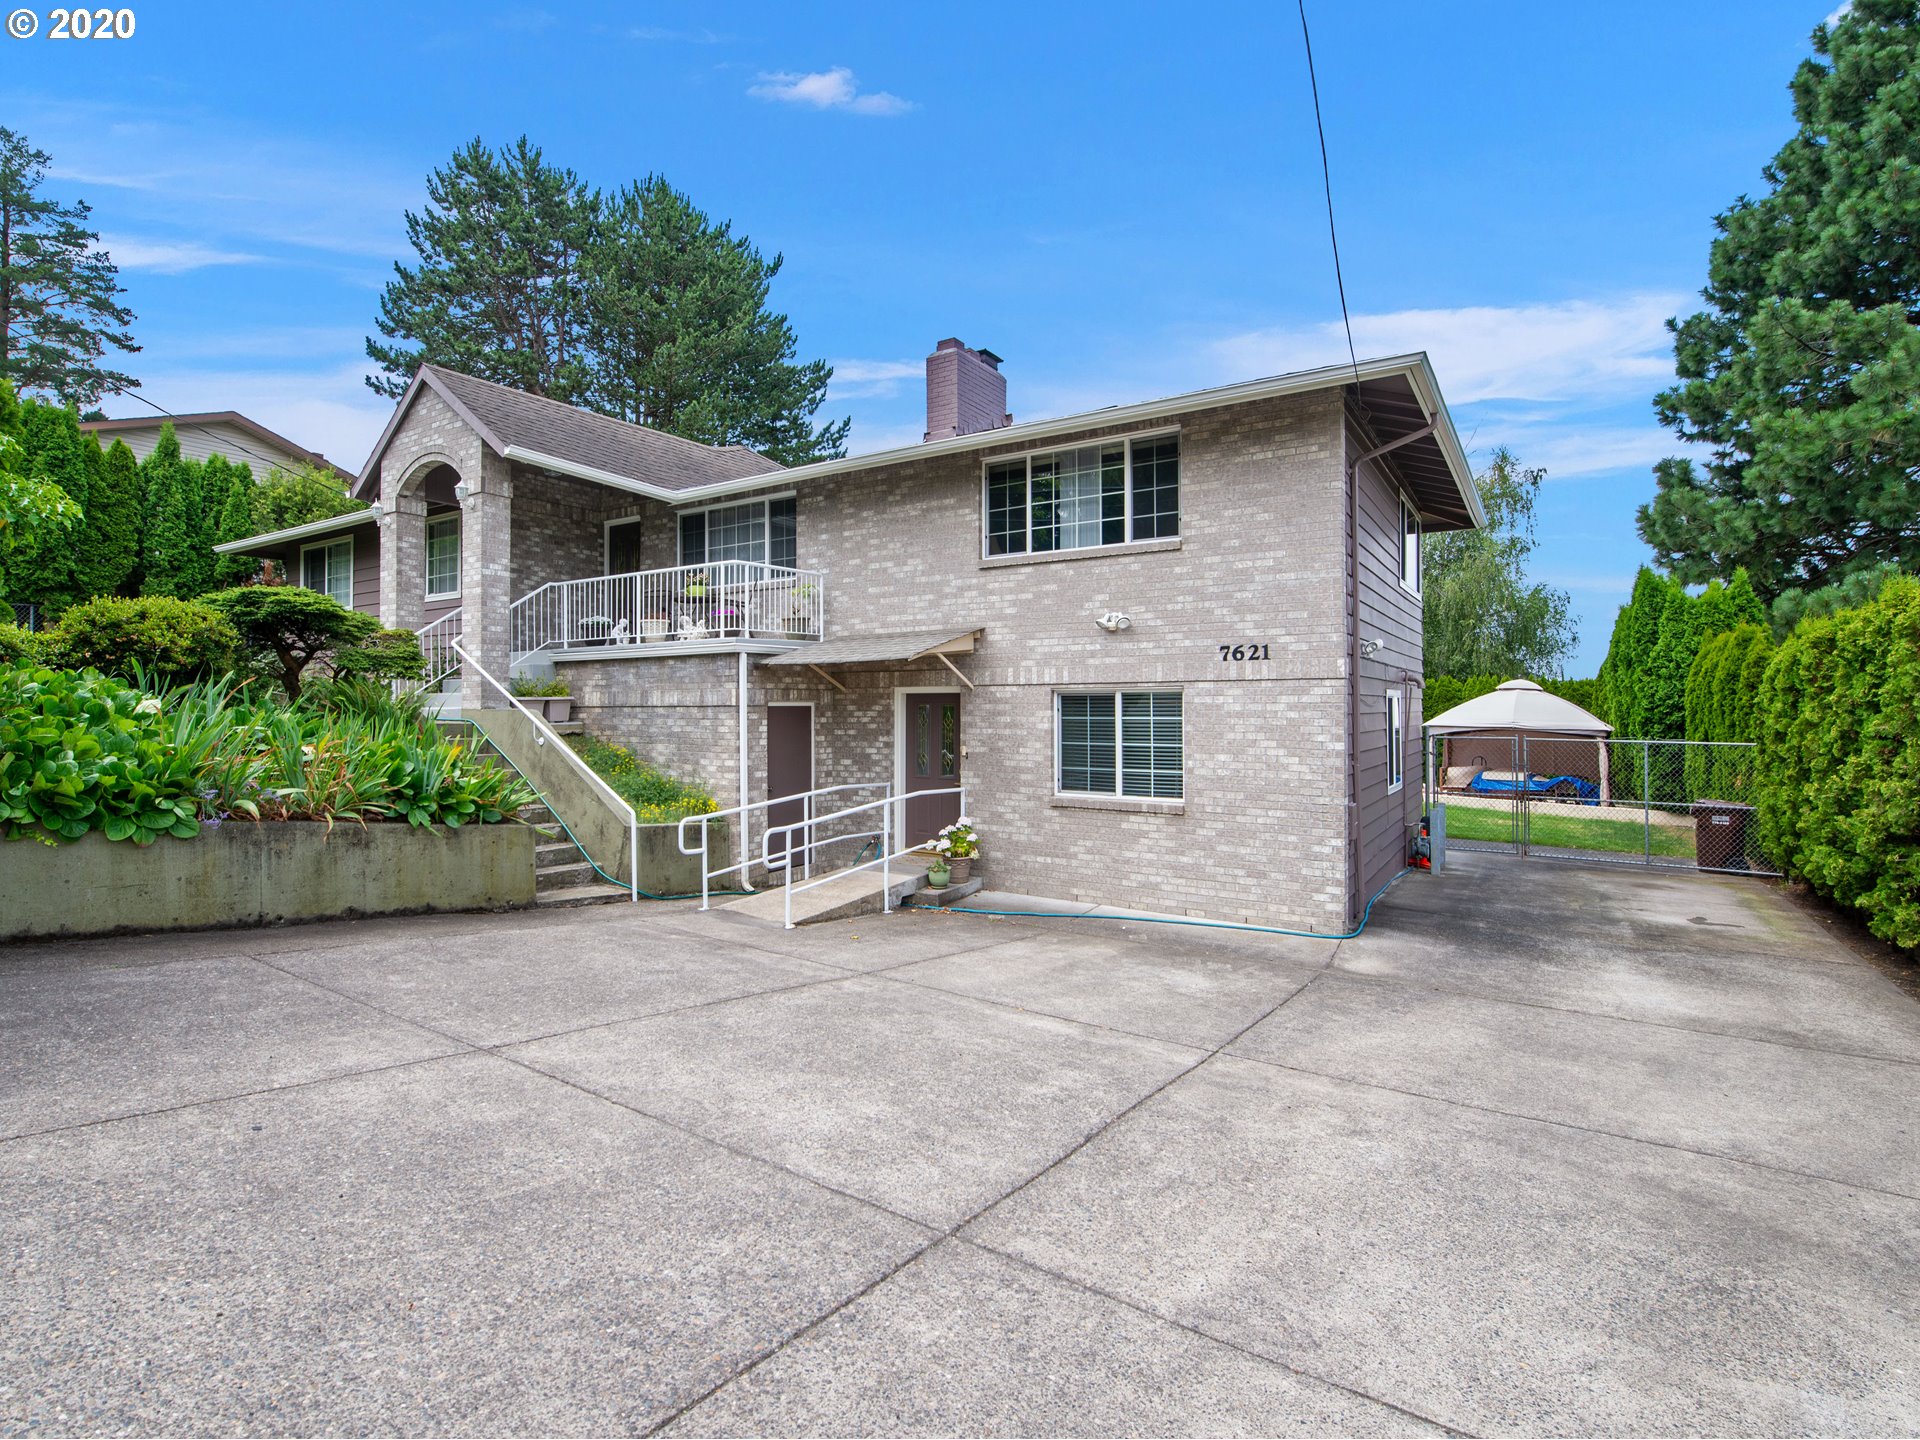 7621 SE 112TH AVE (1 of 32)